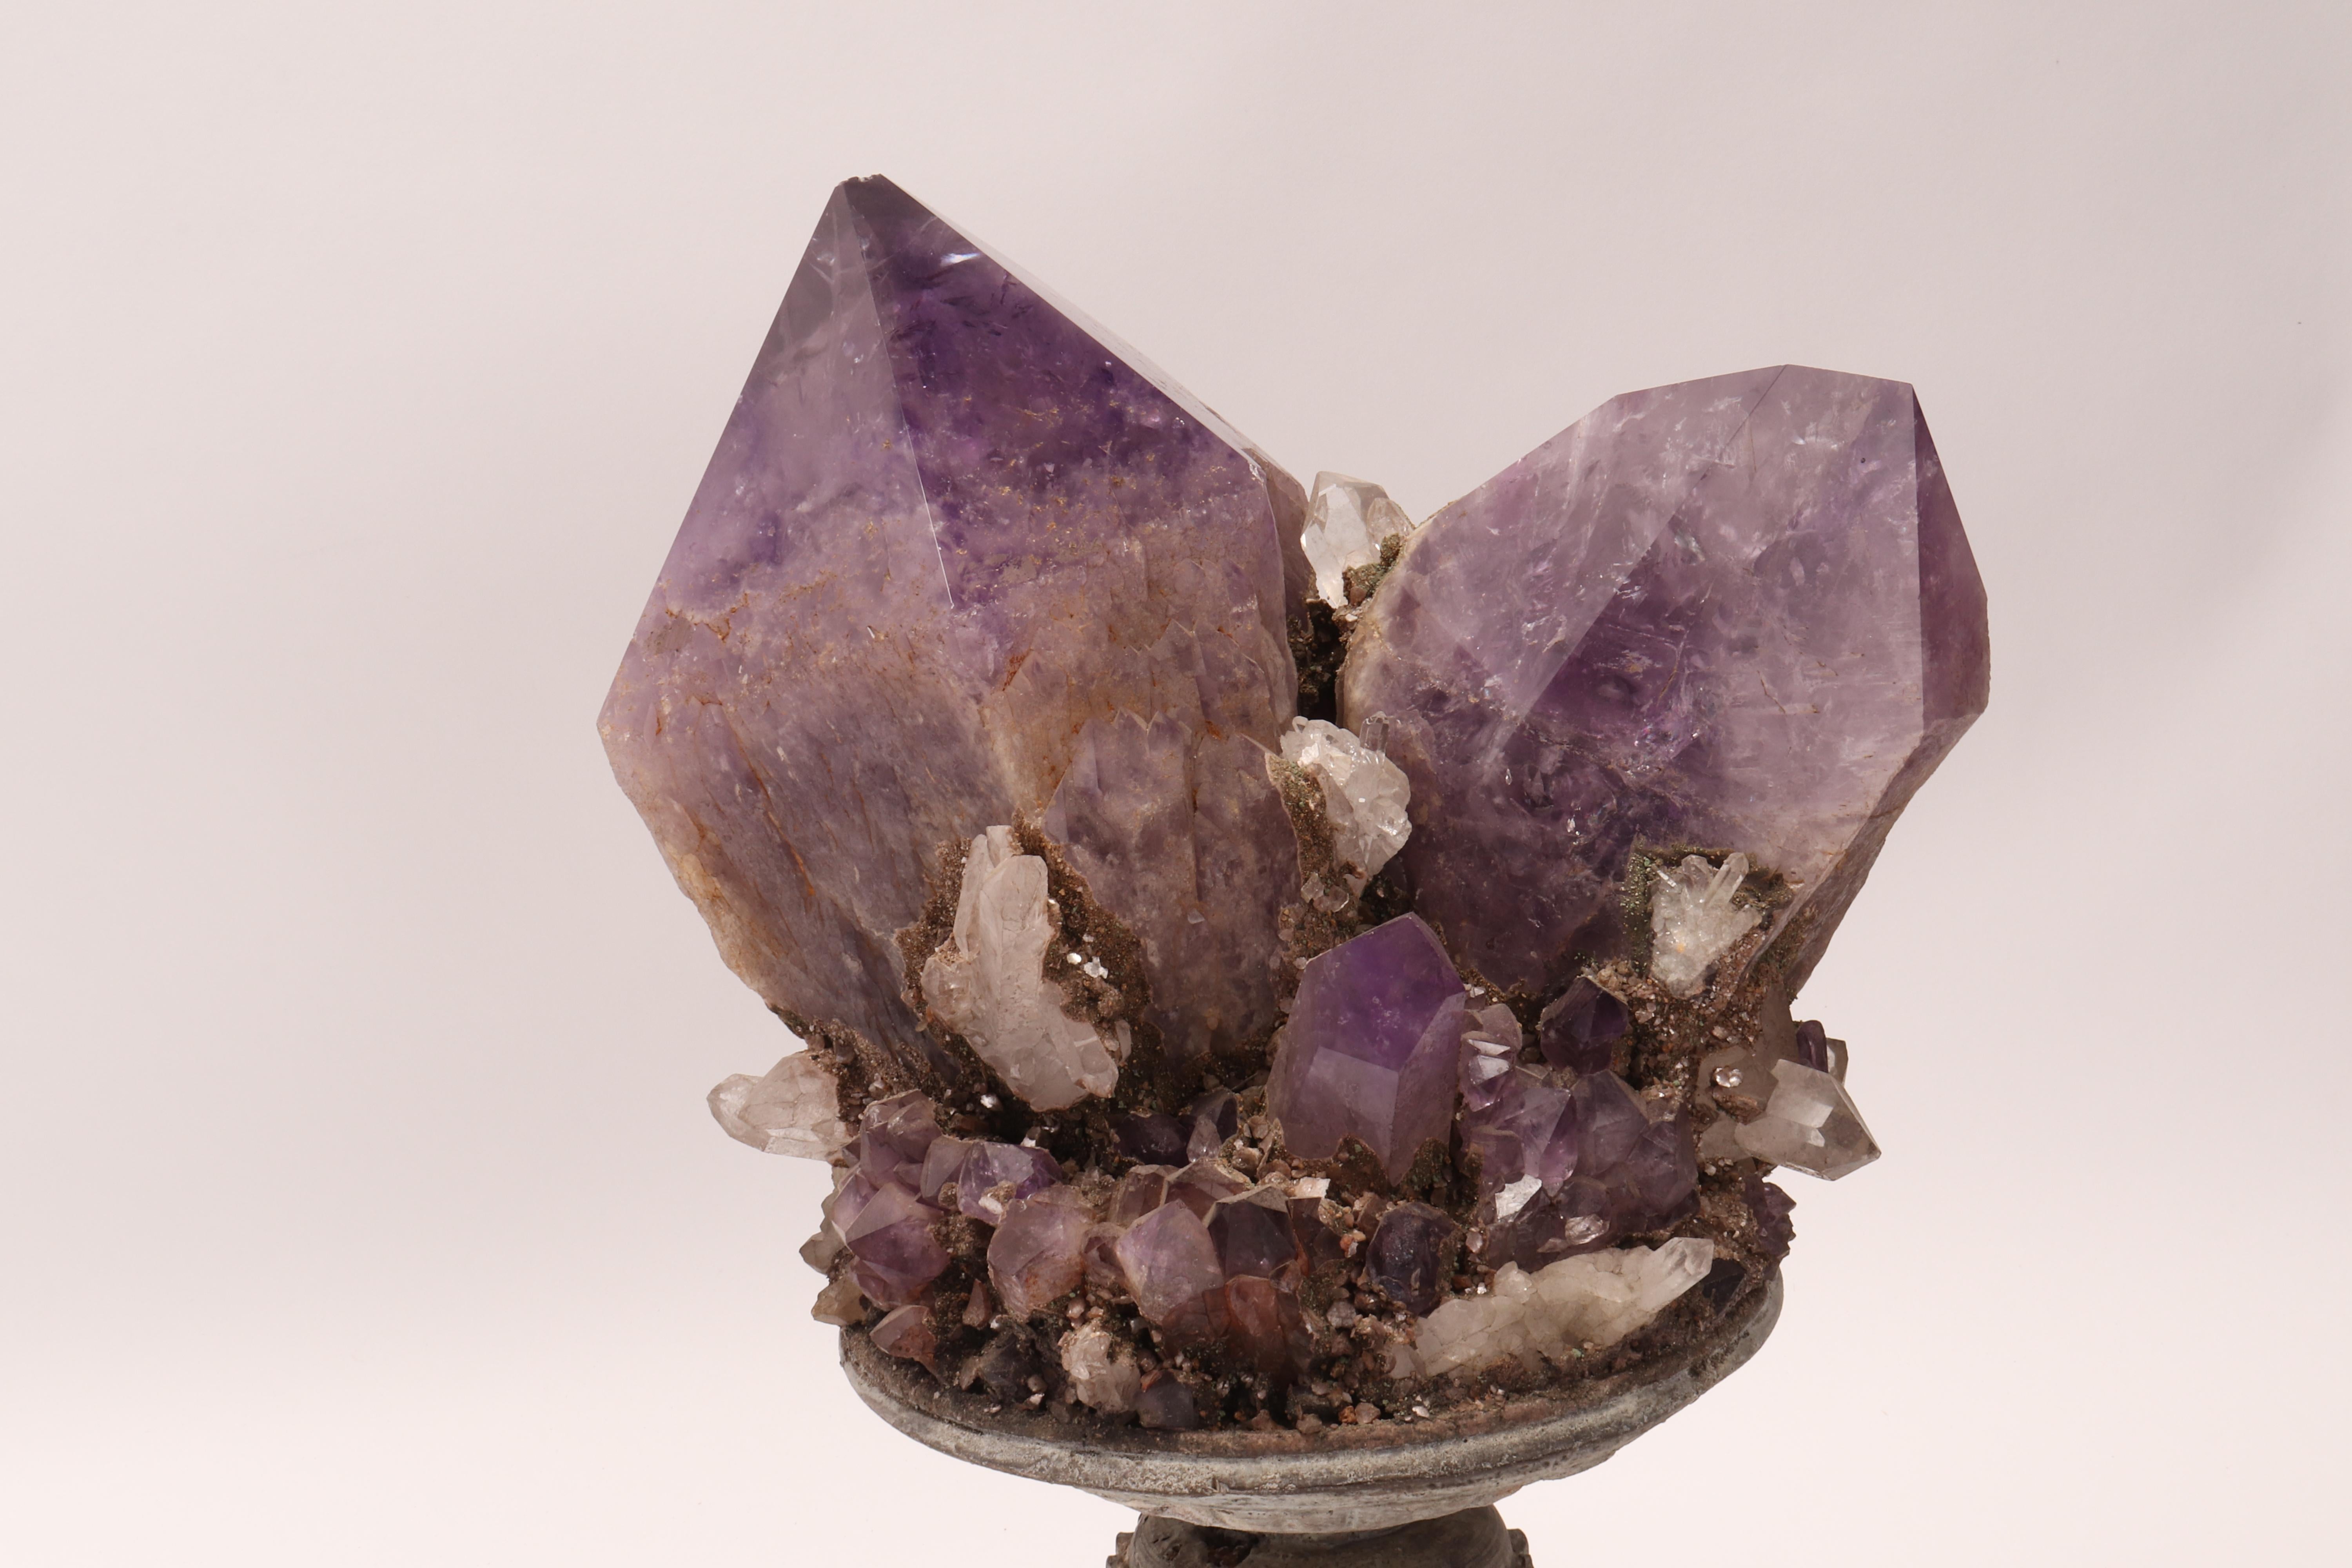 A Naturalia mineral specimen. A Druze of amethyst and quartz crystals mounted over a wooden base on a vase shape, Italy, circa 1880.